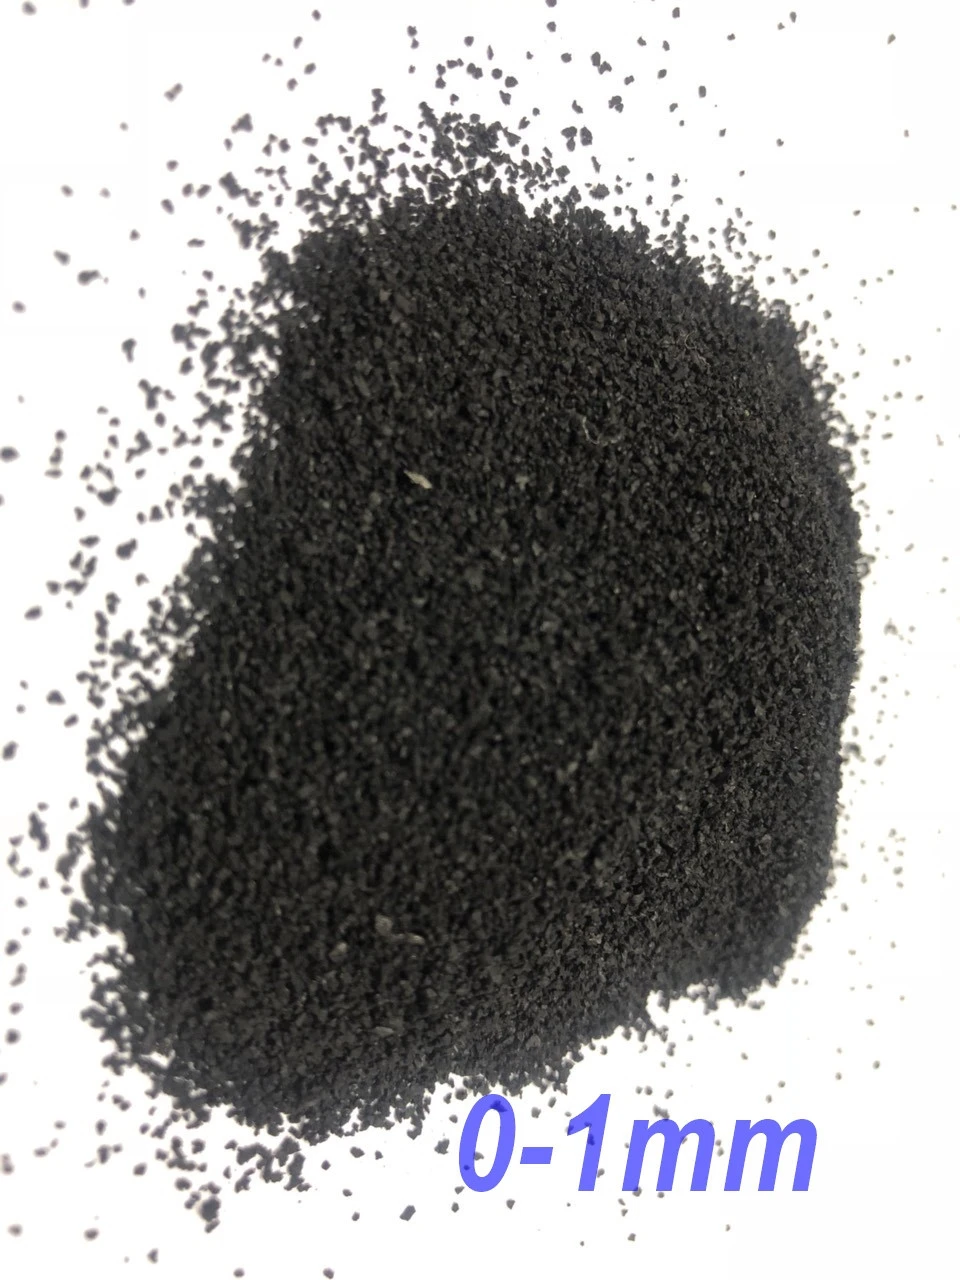 Tyre rubber granules cheap price recycled from old truck tyres for road, pavement, construction projects